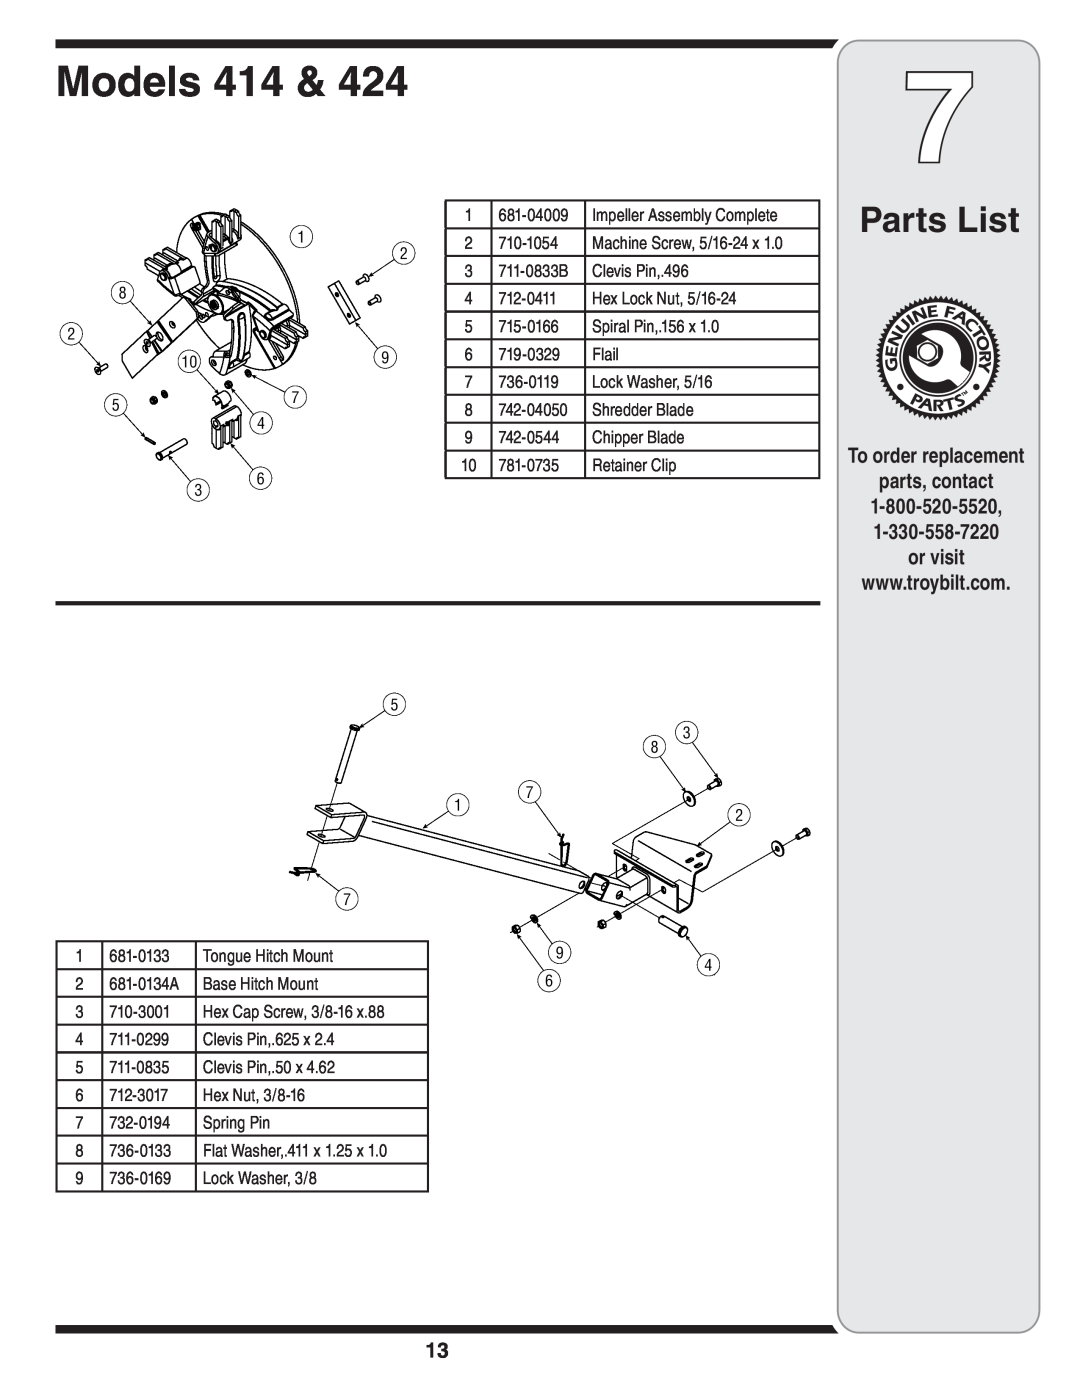 Troy-Bilt 424, 414 manual Models, Parts List, To order replacement parts, contact, or visit 